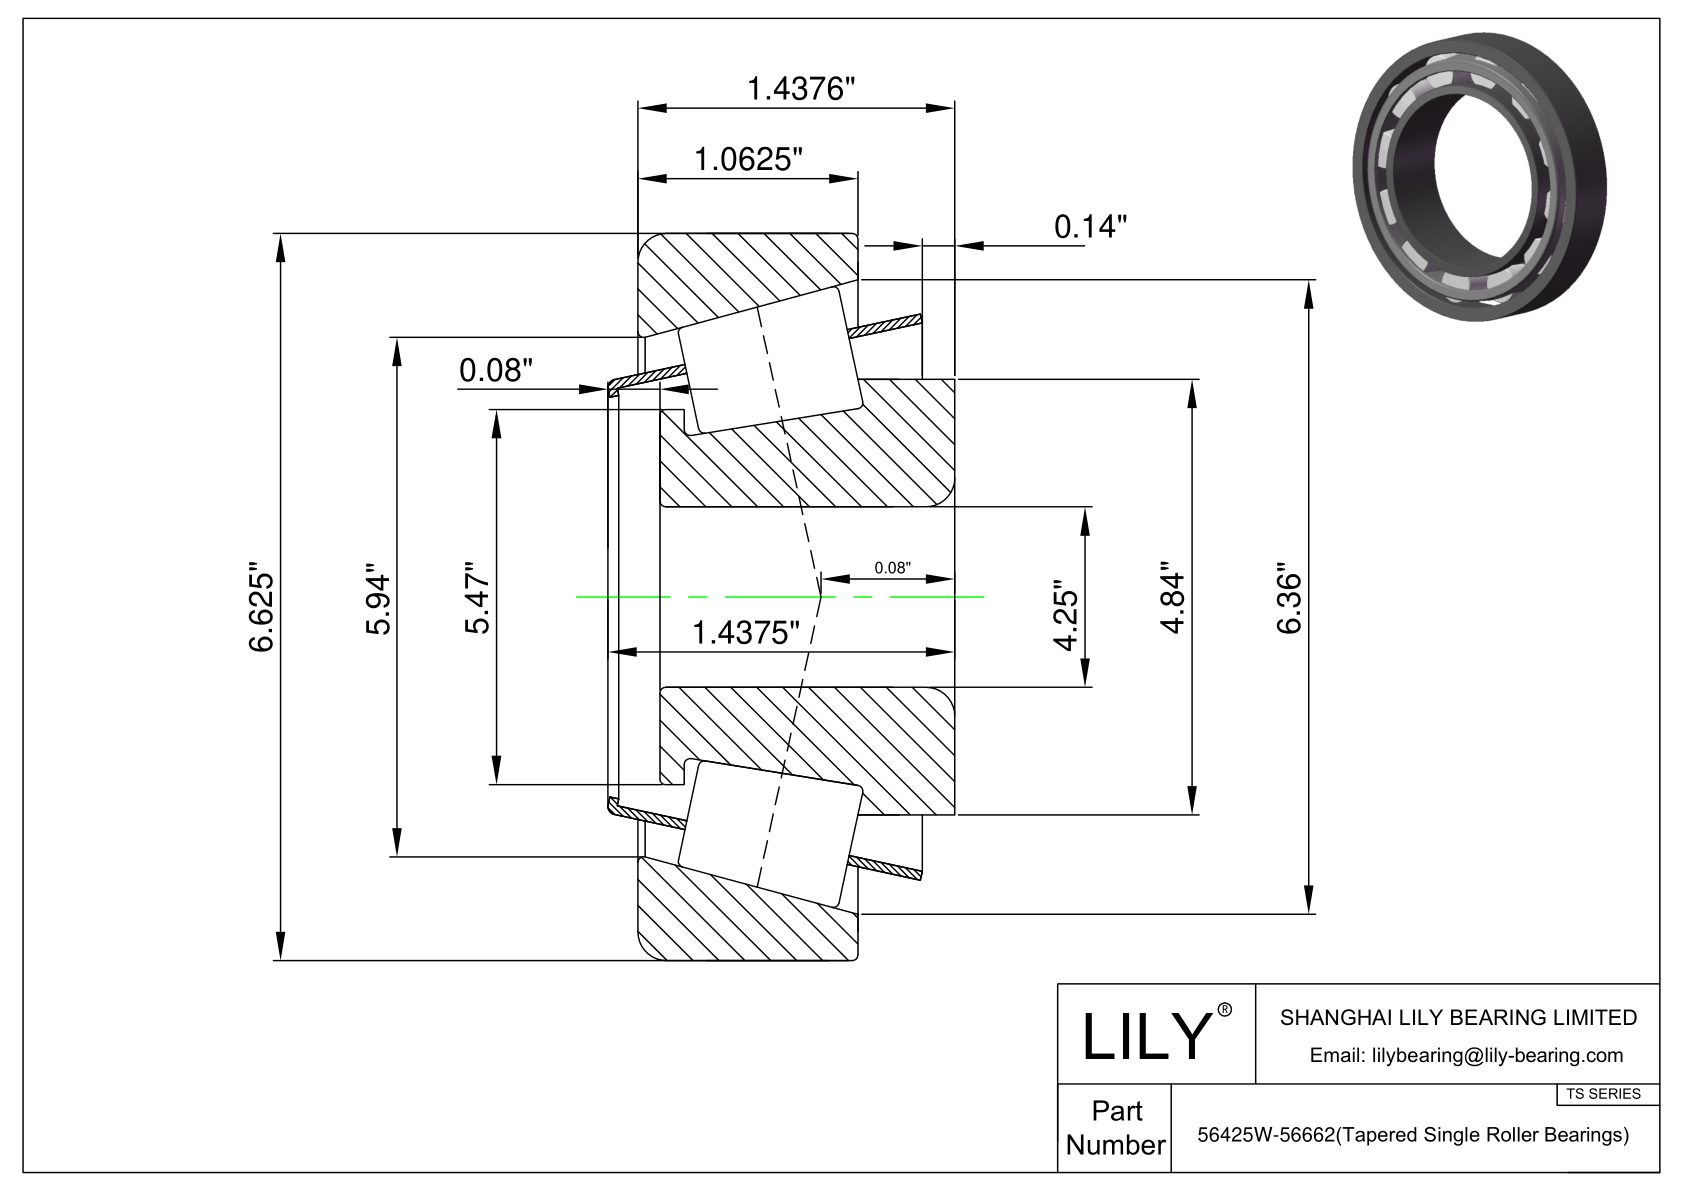 56425W-56662 TS (Tapered Single Roller Bearings) (Imperial) cad drawing